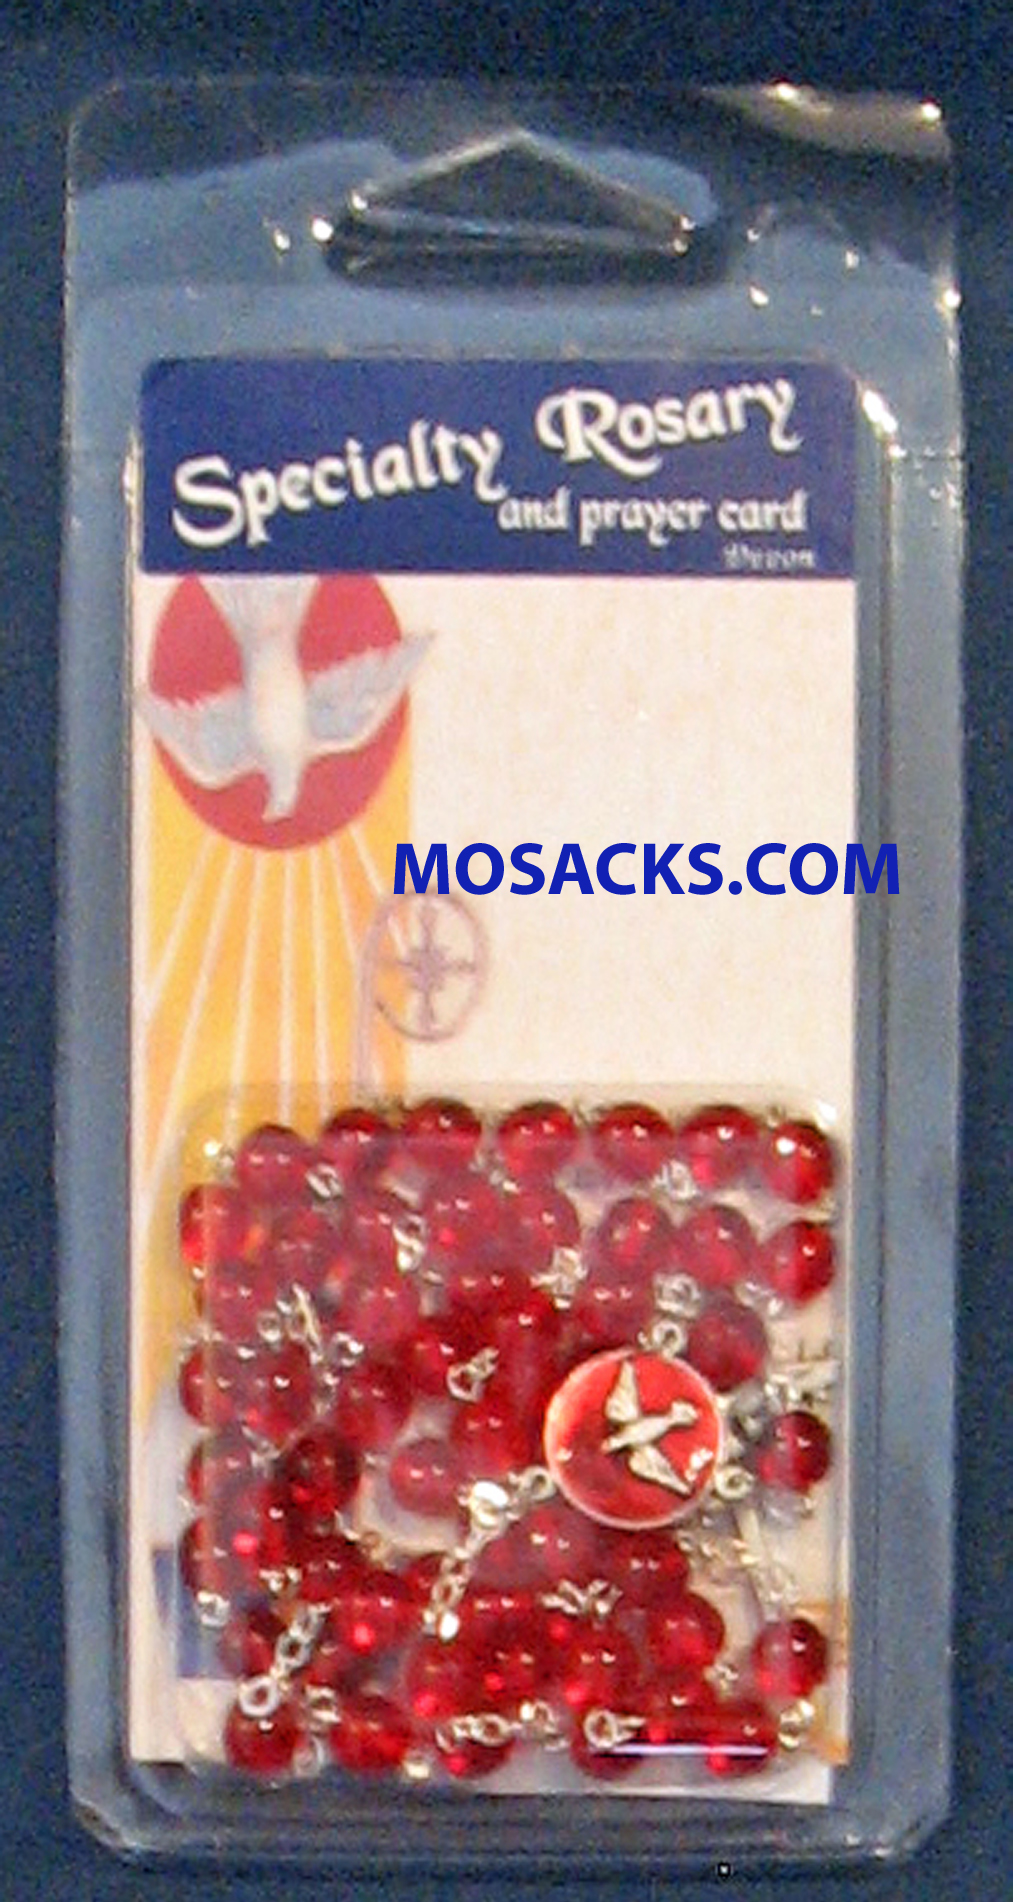 Specialty Rosary Holy Spirit Rosary and Prayer Card 64-05387/C1